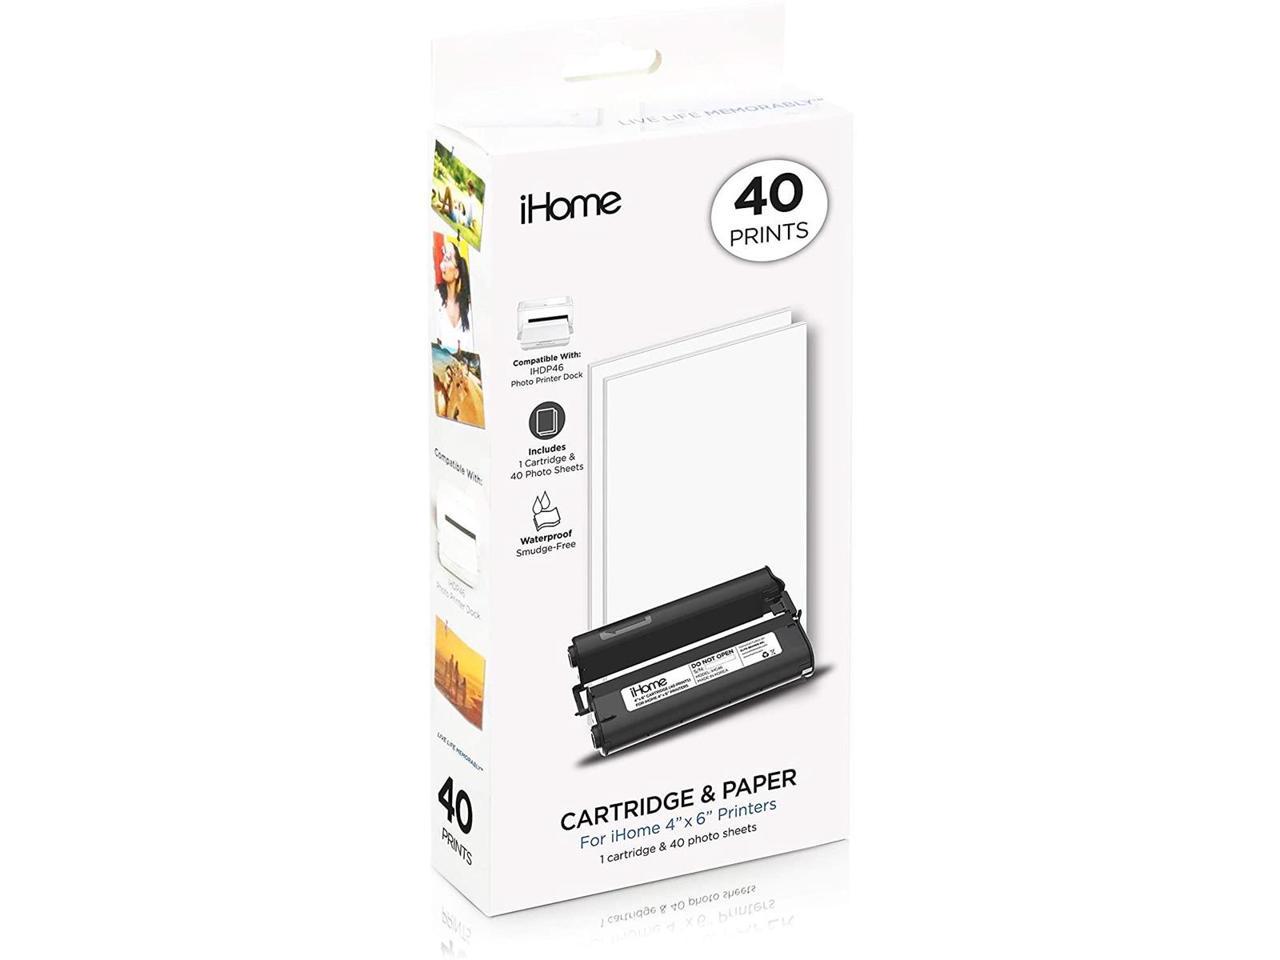 iHome 4-Inch x 6-Inch Ink + Paper Refill Cartridge, 40 Prints